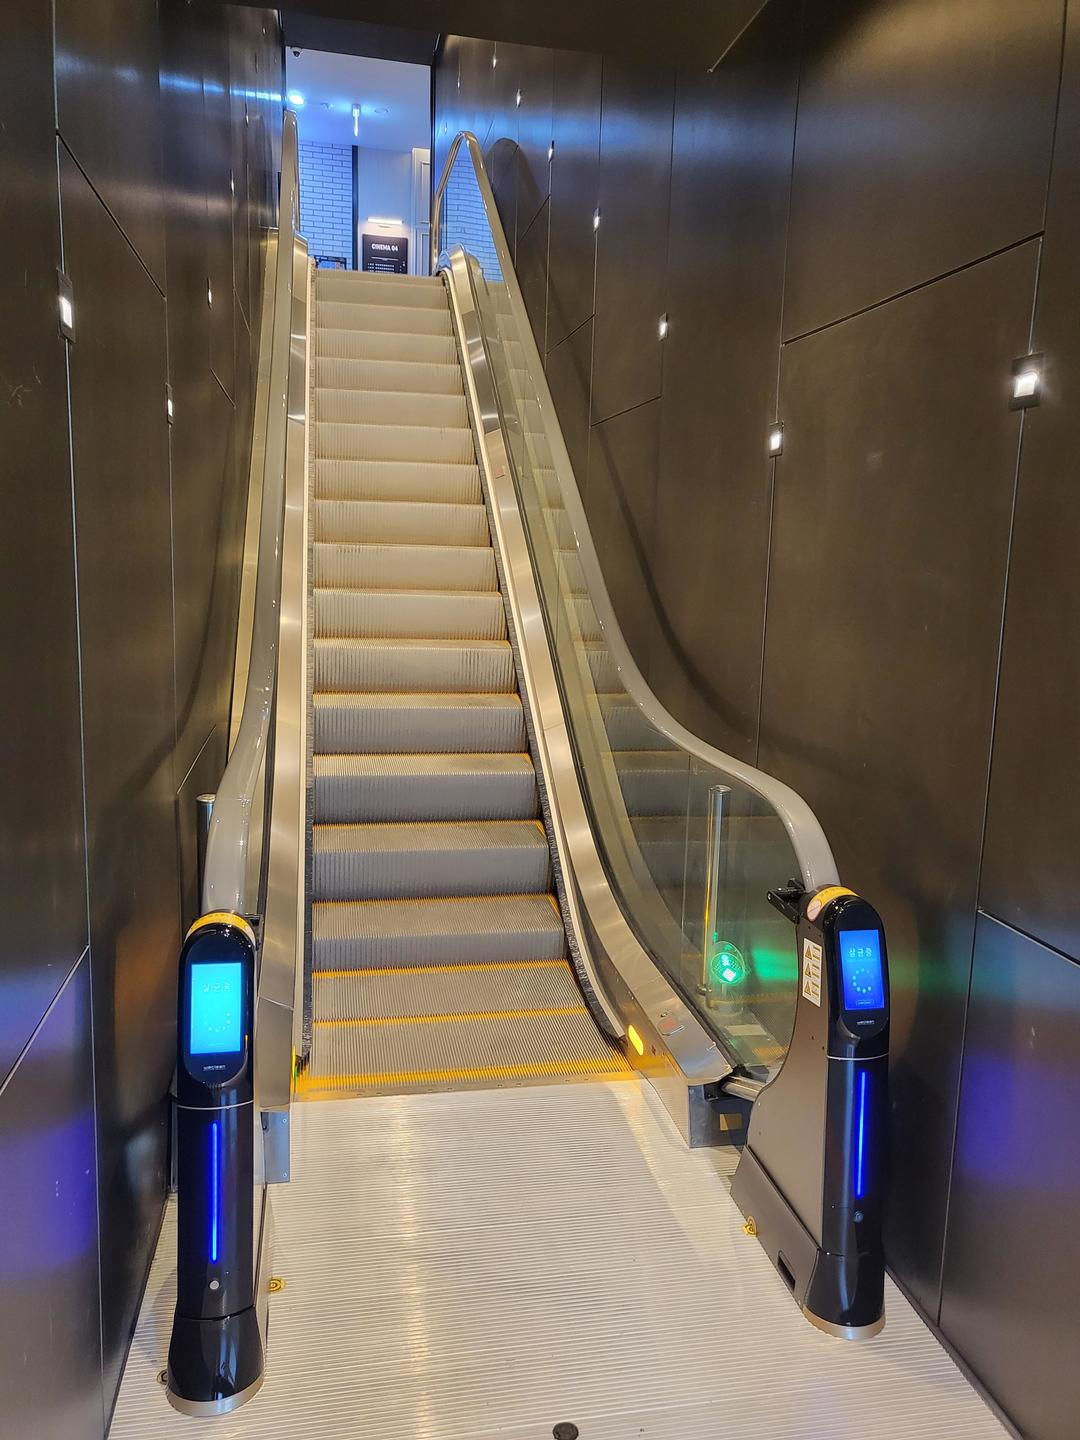 Escalator handle sterilizer installed as part of the Corona 19 prevention system in a shopping mall (sterilization and cleaning) Weclean 6